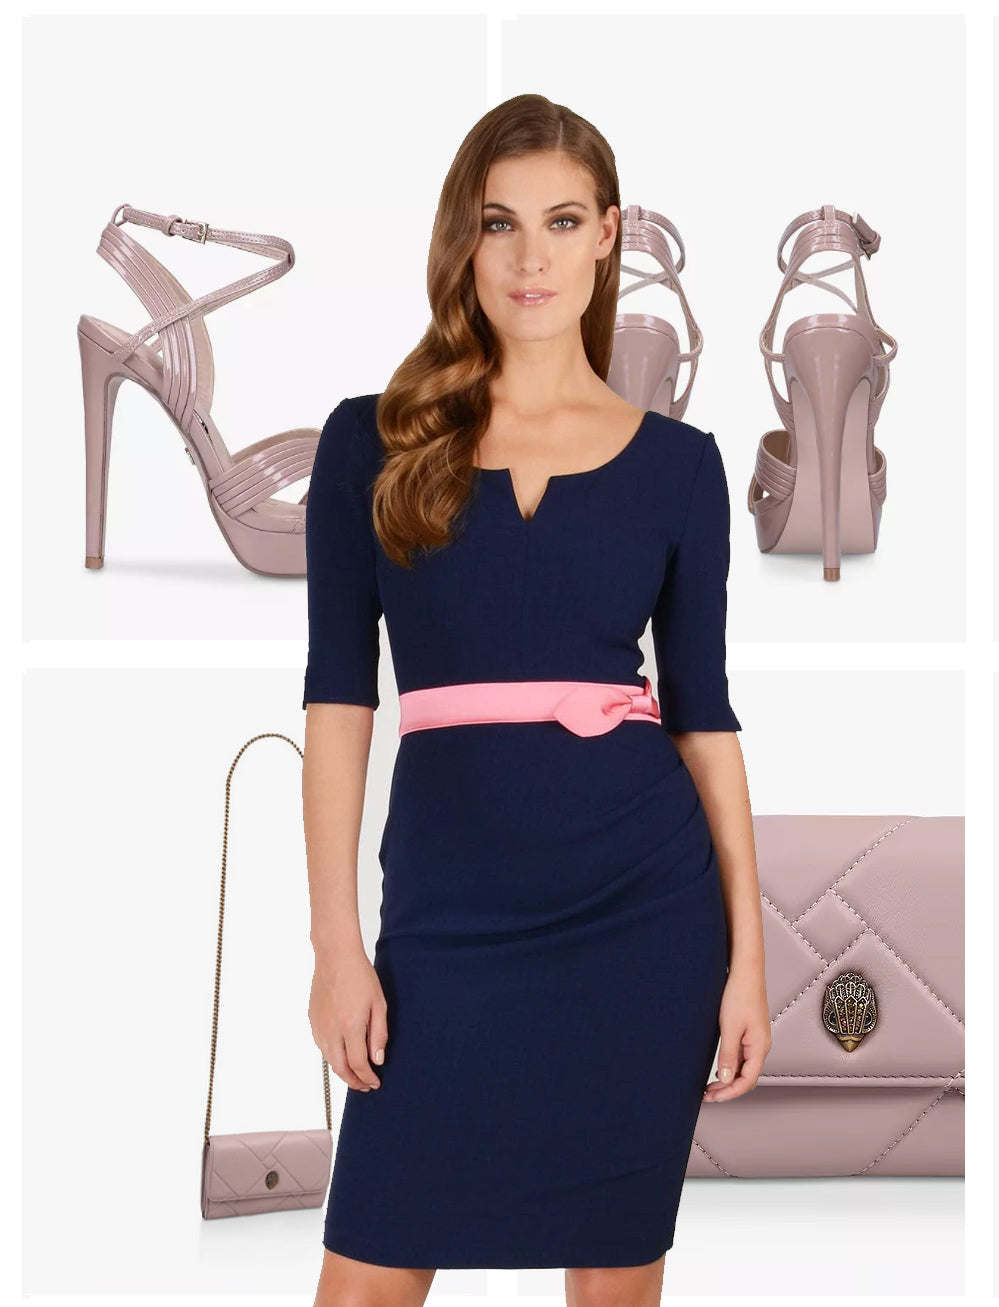 a model pictured wearing Diva Catwalk's Lilith Bodycon Dress with Ted Baker shoes and bags in images behind her.